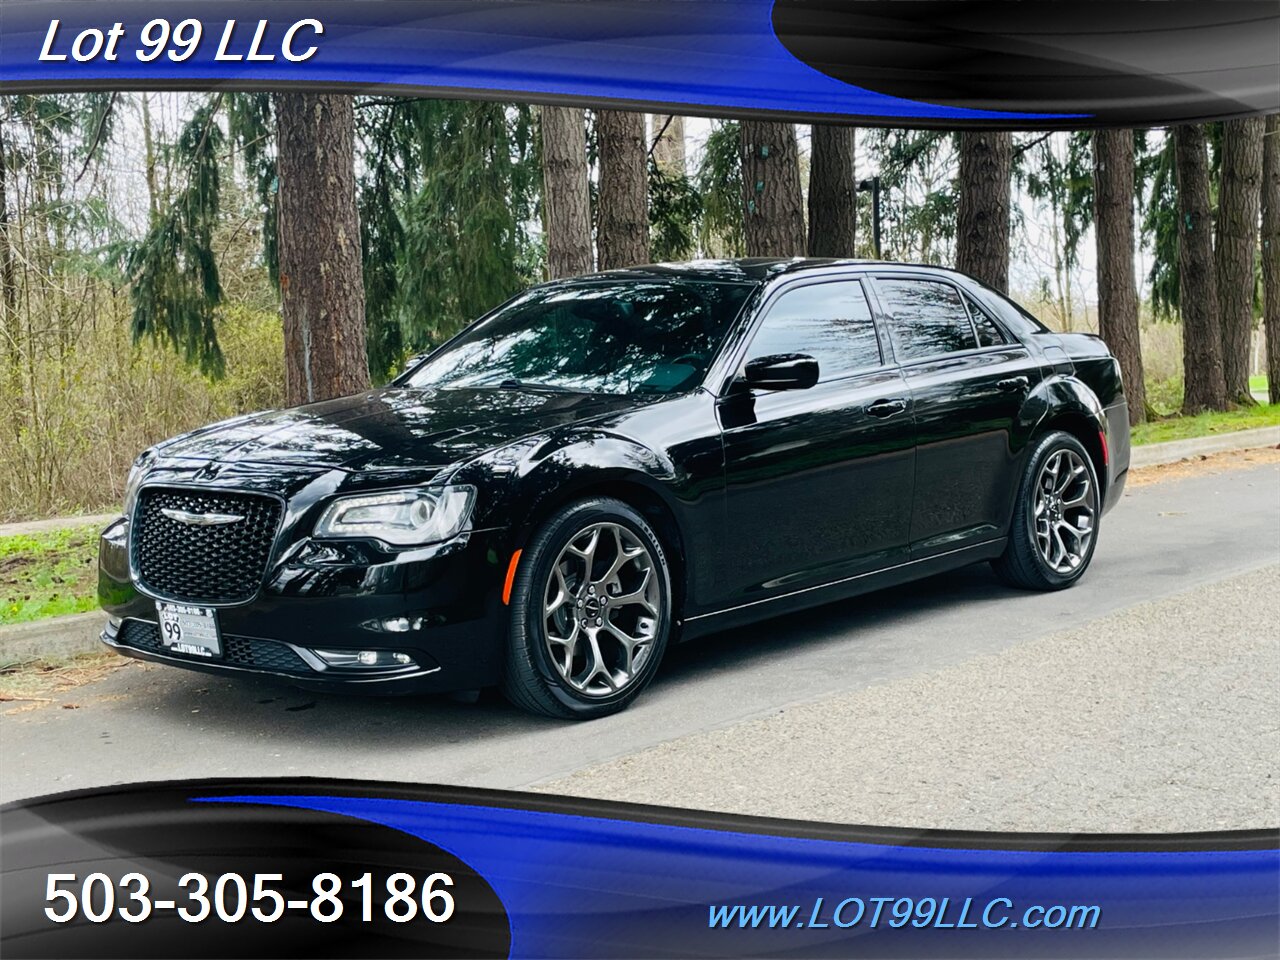 2015 Chrysler 300 Series S Only 86k Miles  Navi Pano HTD Leather 31MPG   - Photo 2 - Milwaukie, OR 97267